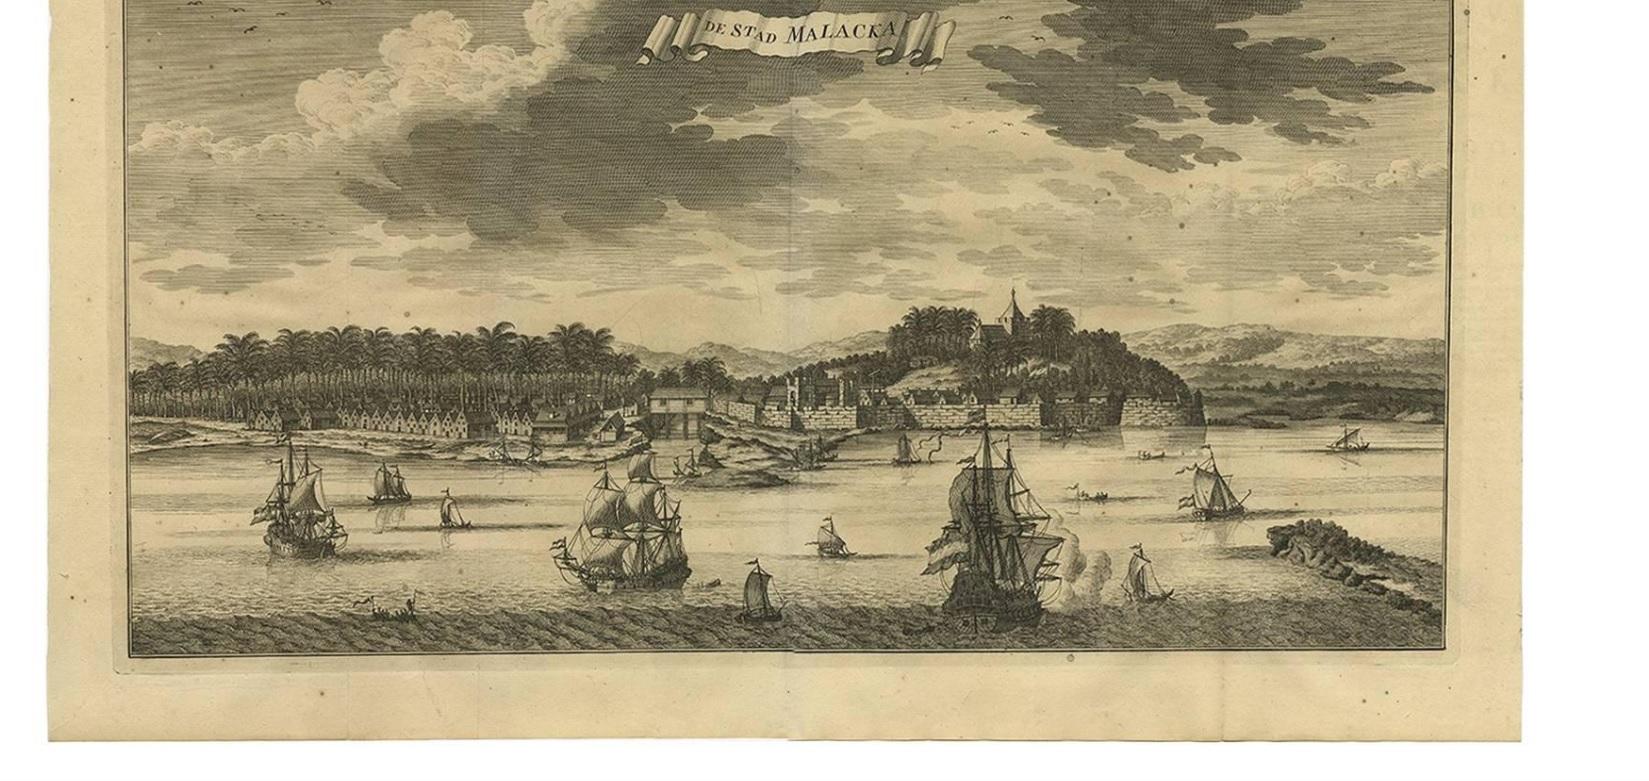 This copper-engraved view depicts the city of Malacca, with numerous ships sailing the Straits of Malacca. 

Valentyn was a prominent historian of the Dutch East India Company who is best known for 'Oud en Nieuw Oost Indien', his illustrated account